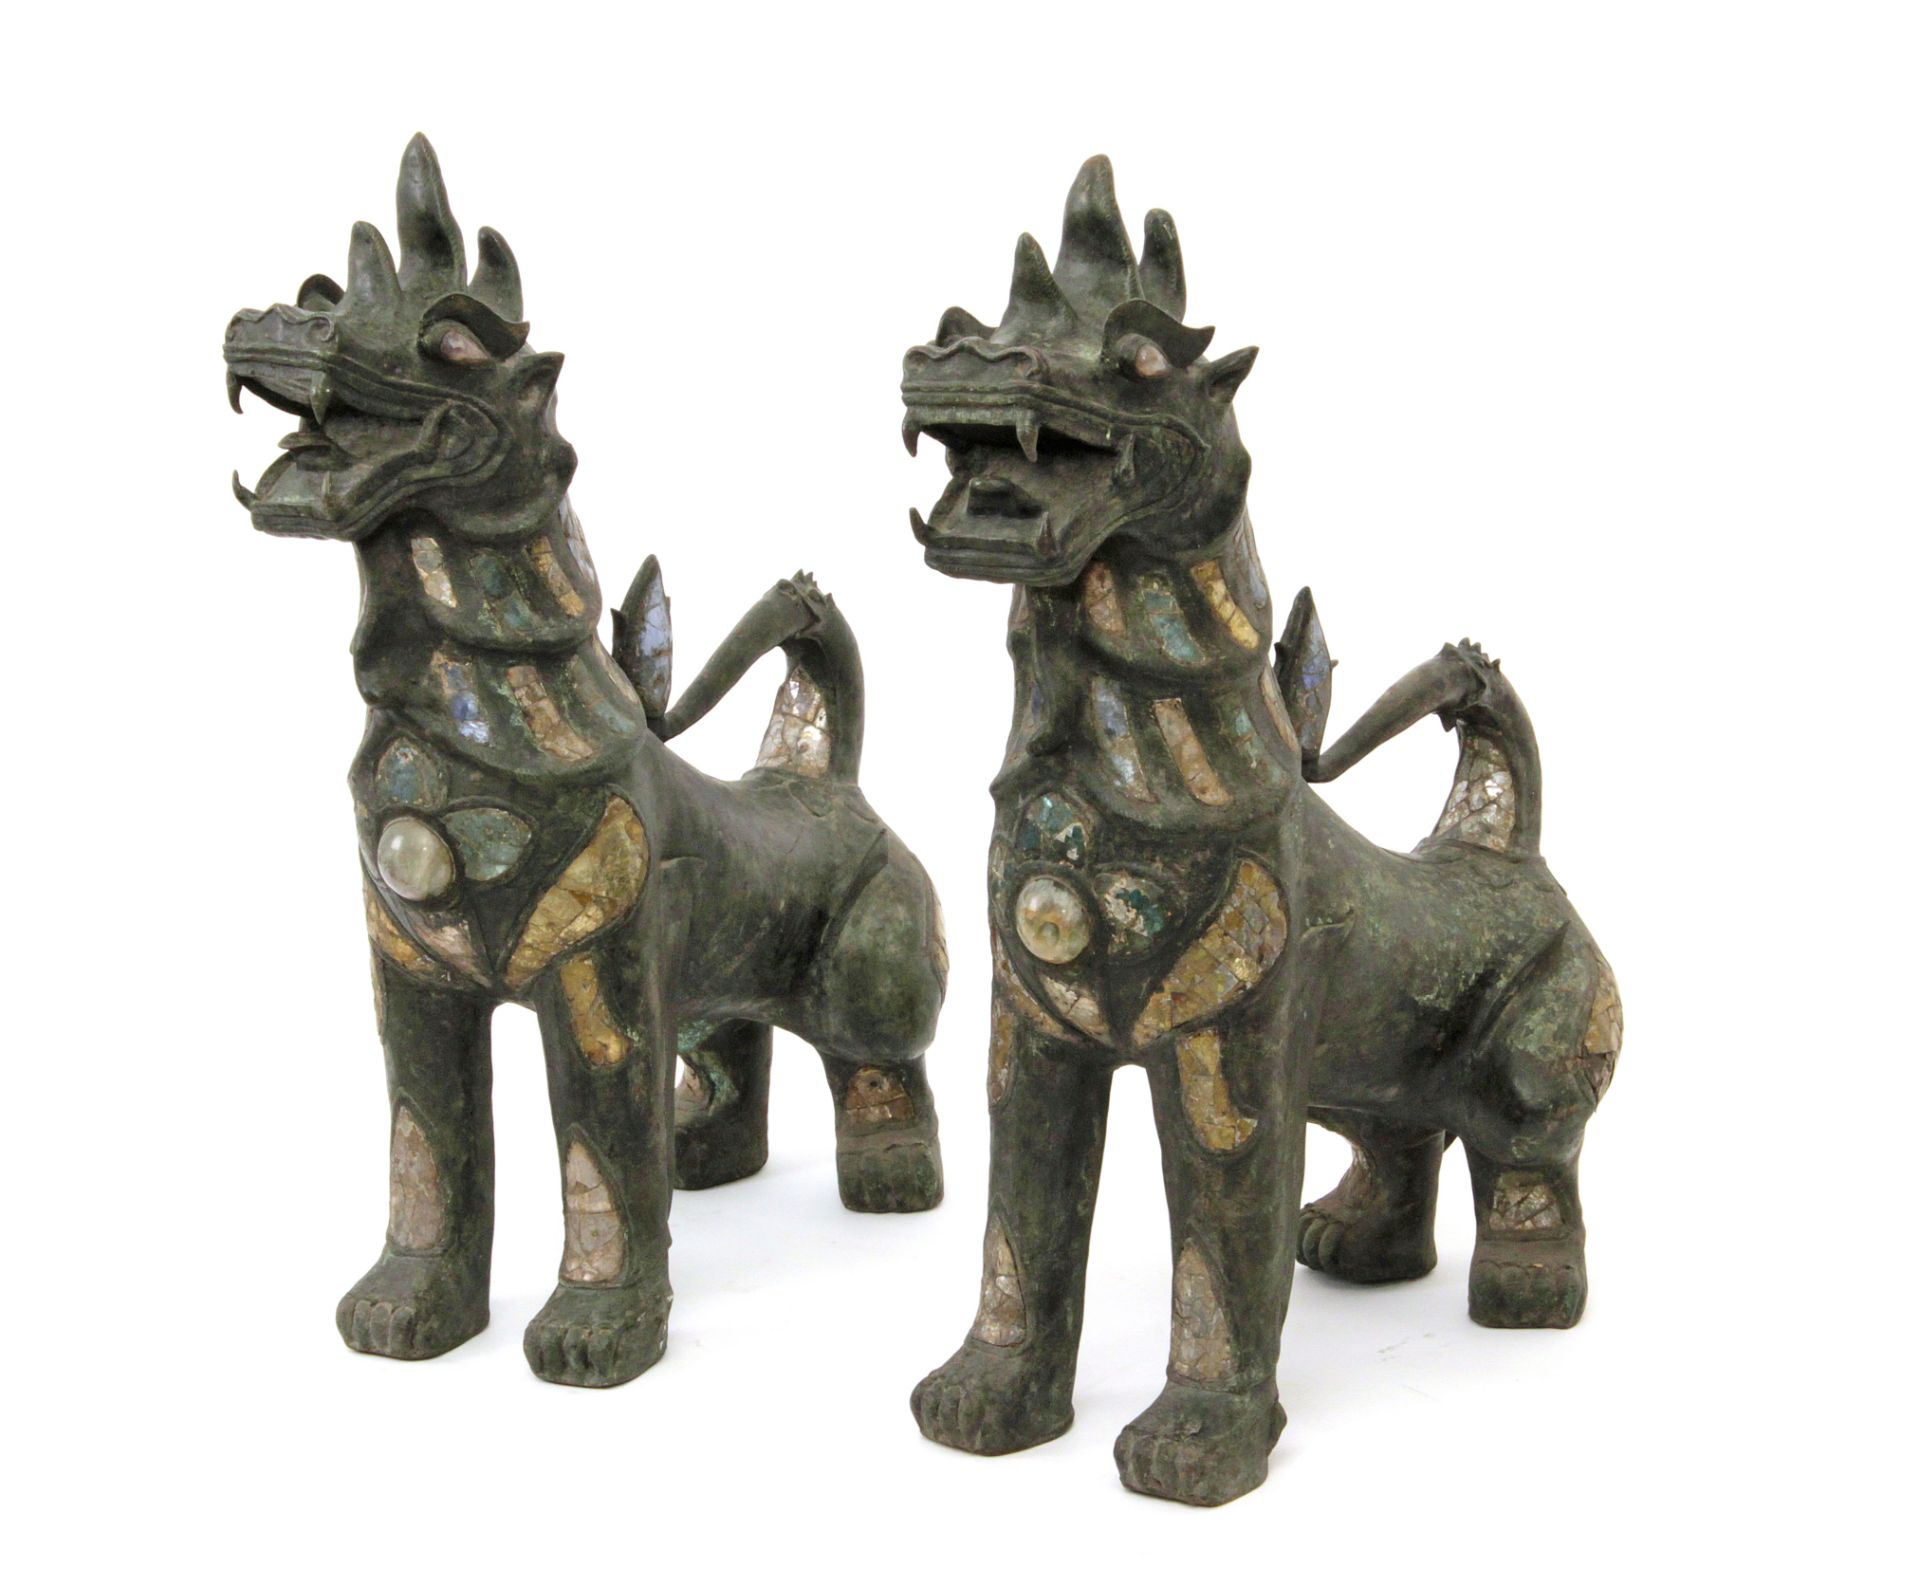 A pair of 20th century Cambodian Fu guardian lion sculptures in bronze